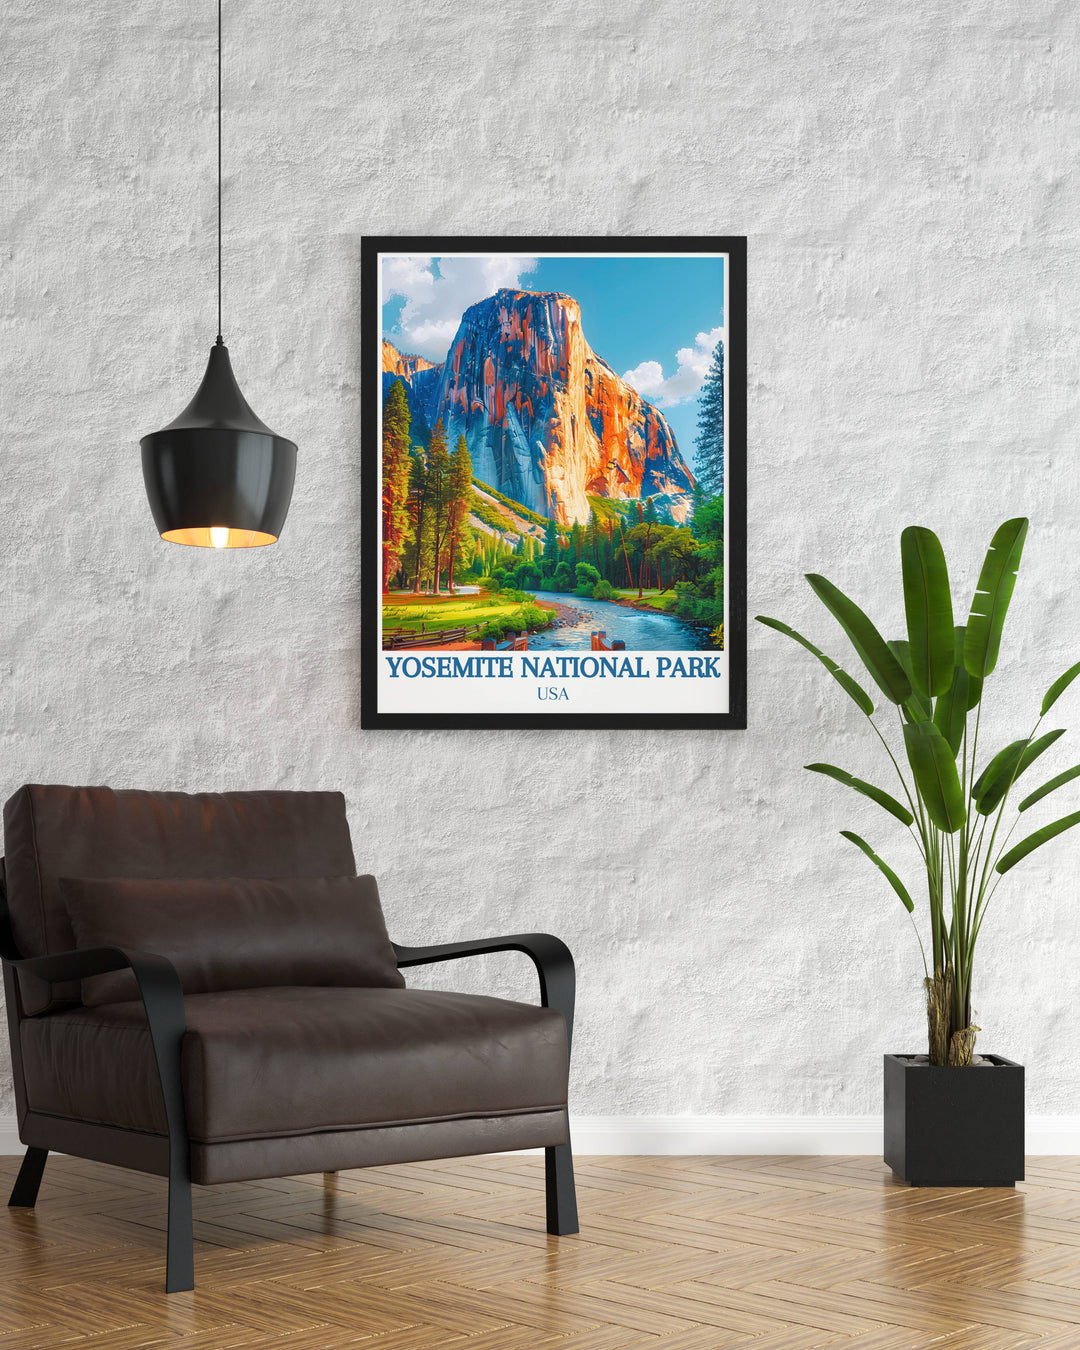 Beautiful Yosemite National Park home decor print showcasing Mirror Lakes serene beauty and inviting you to explore the wonders of this beloved destination from home.